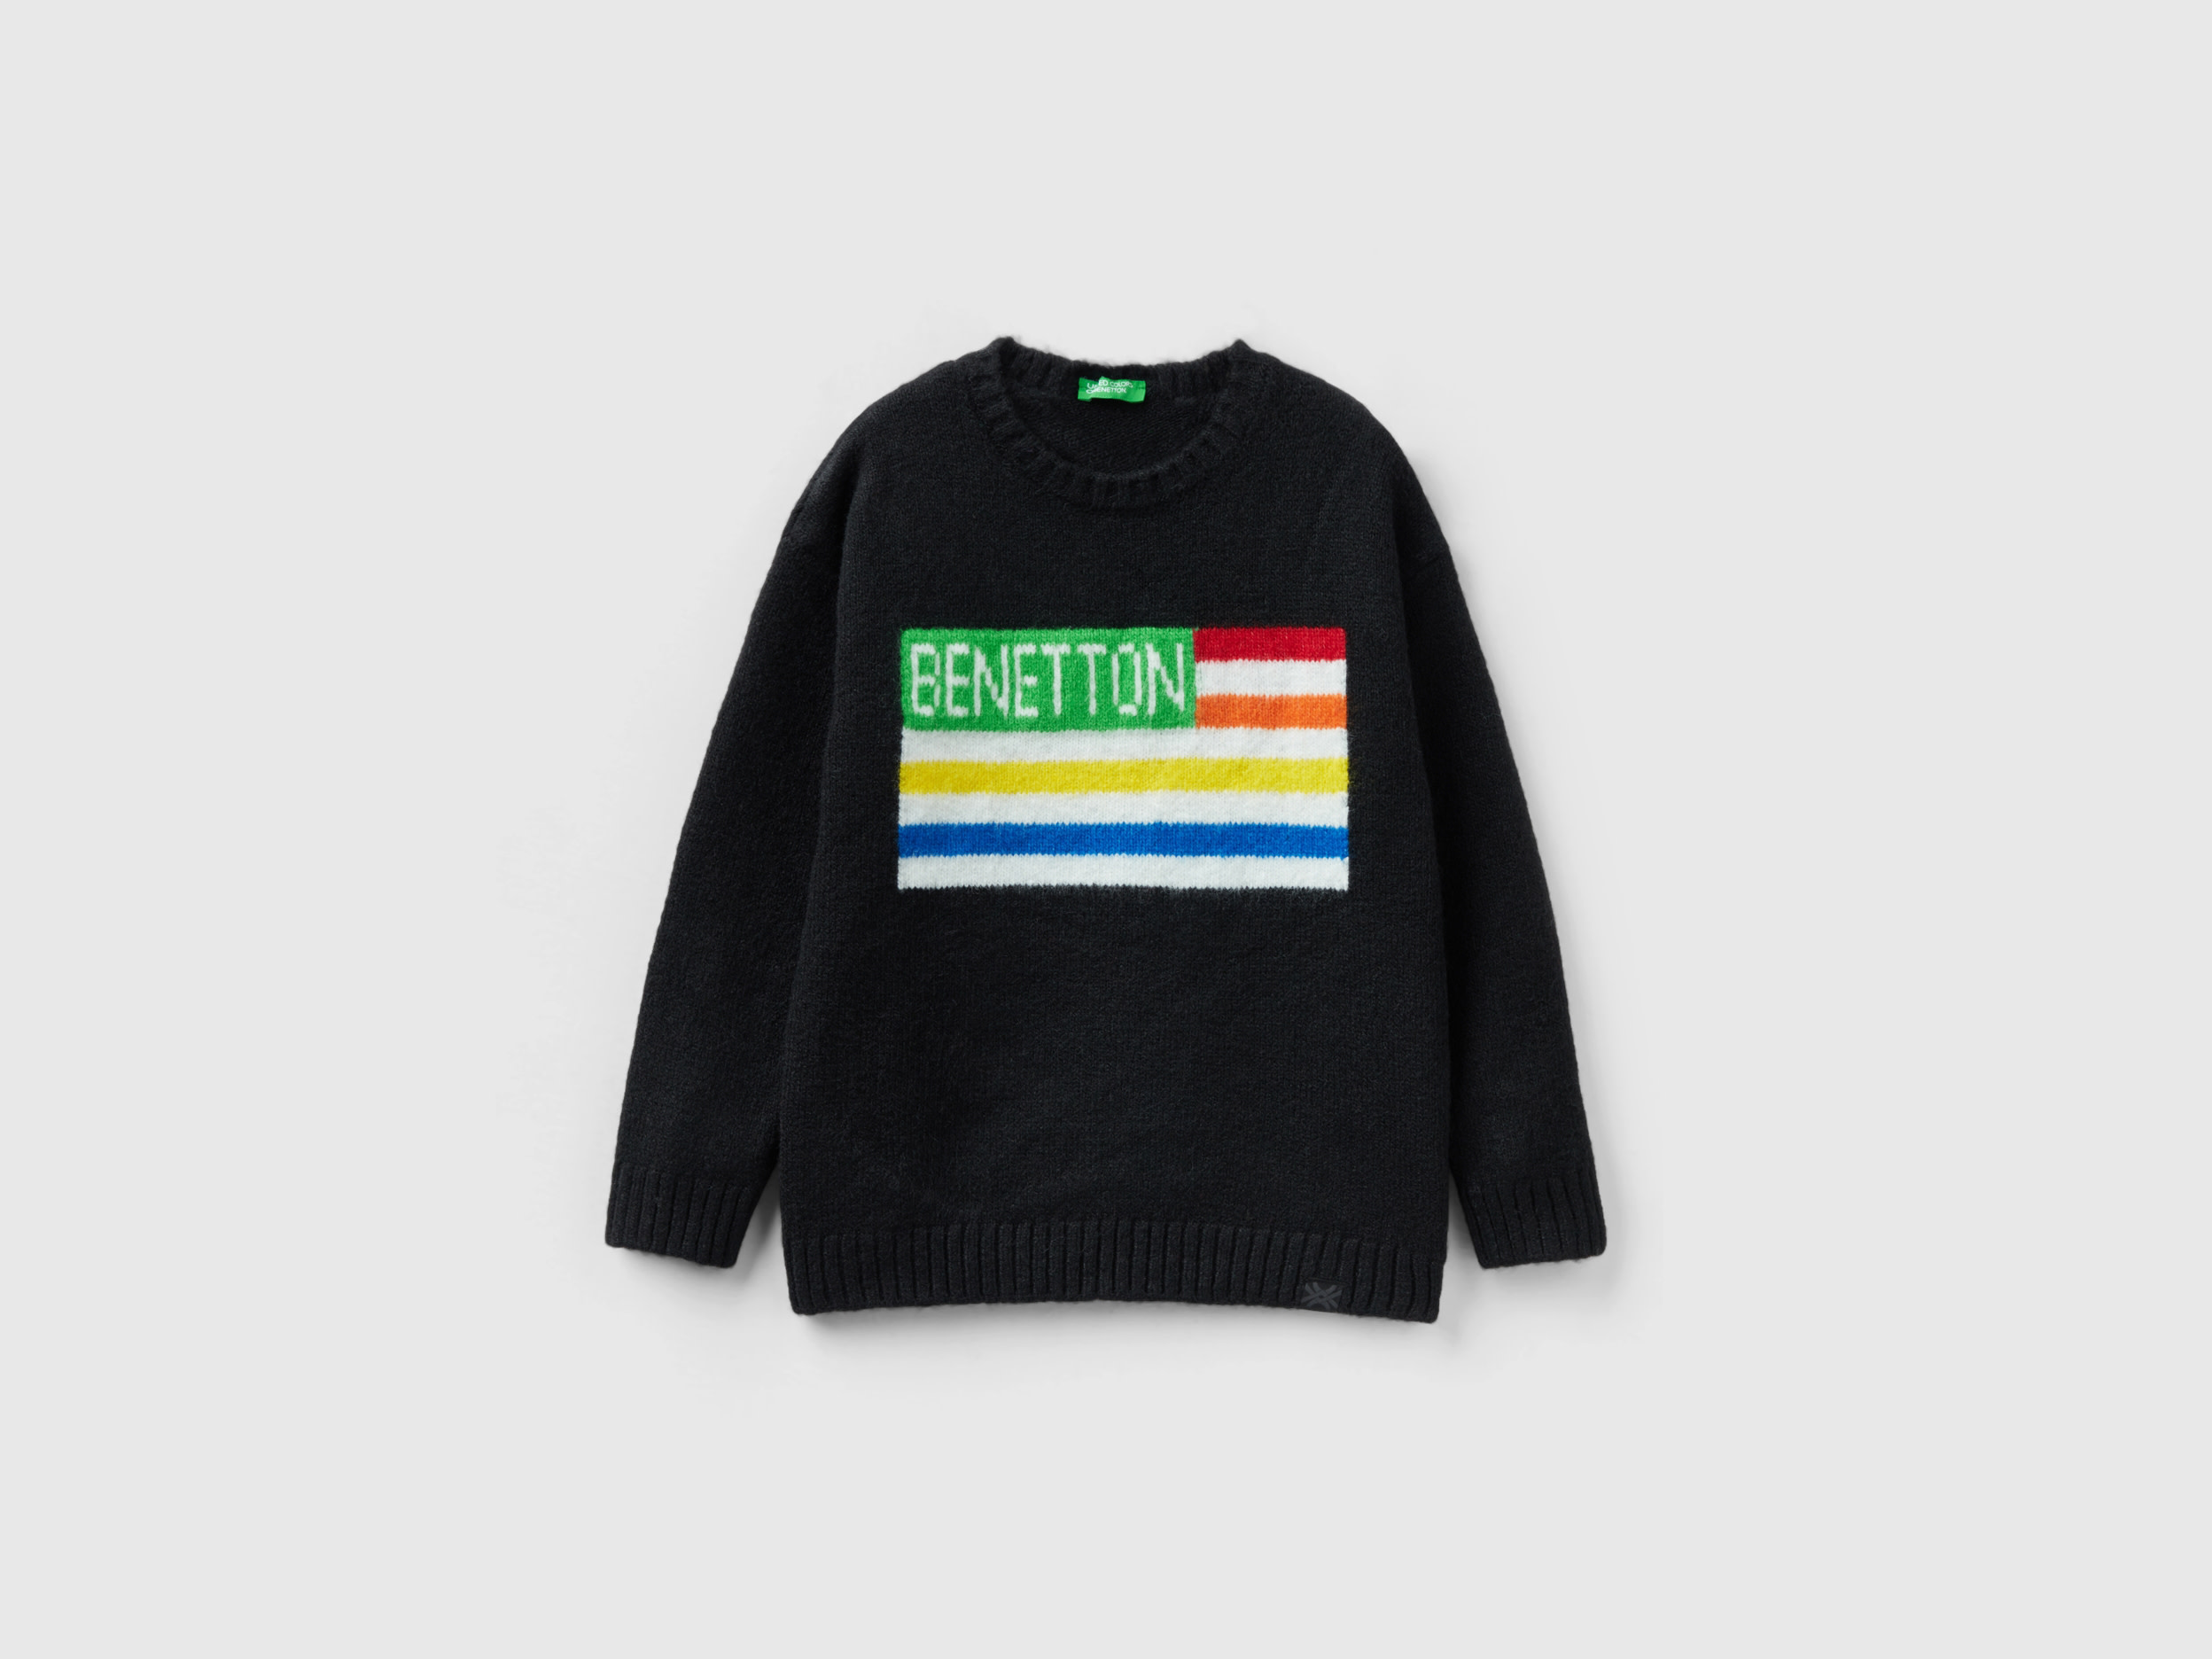 Benetton, Sweater With Flag Inlay, size M, Black, Kids